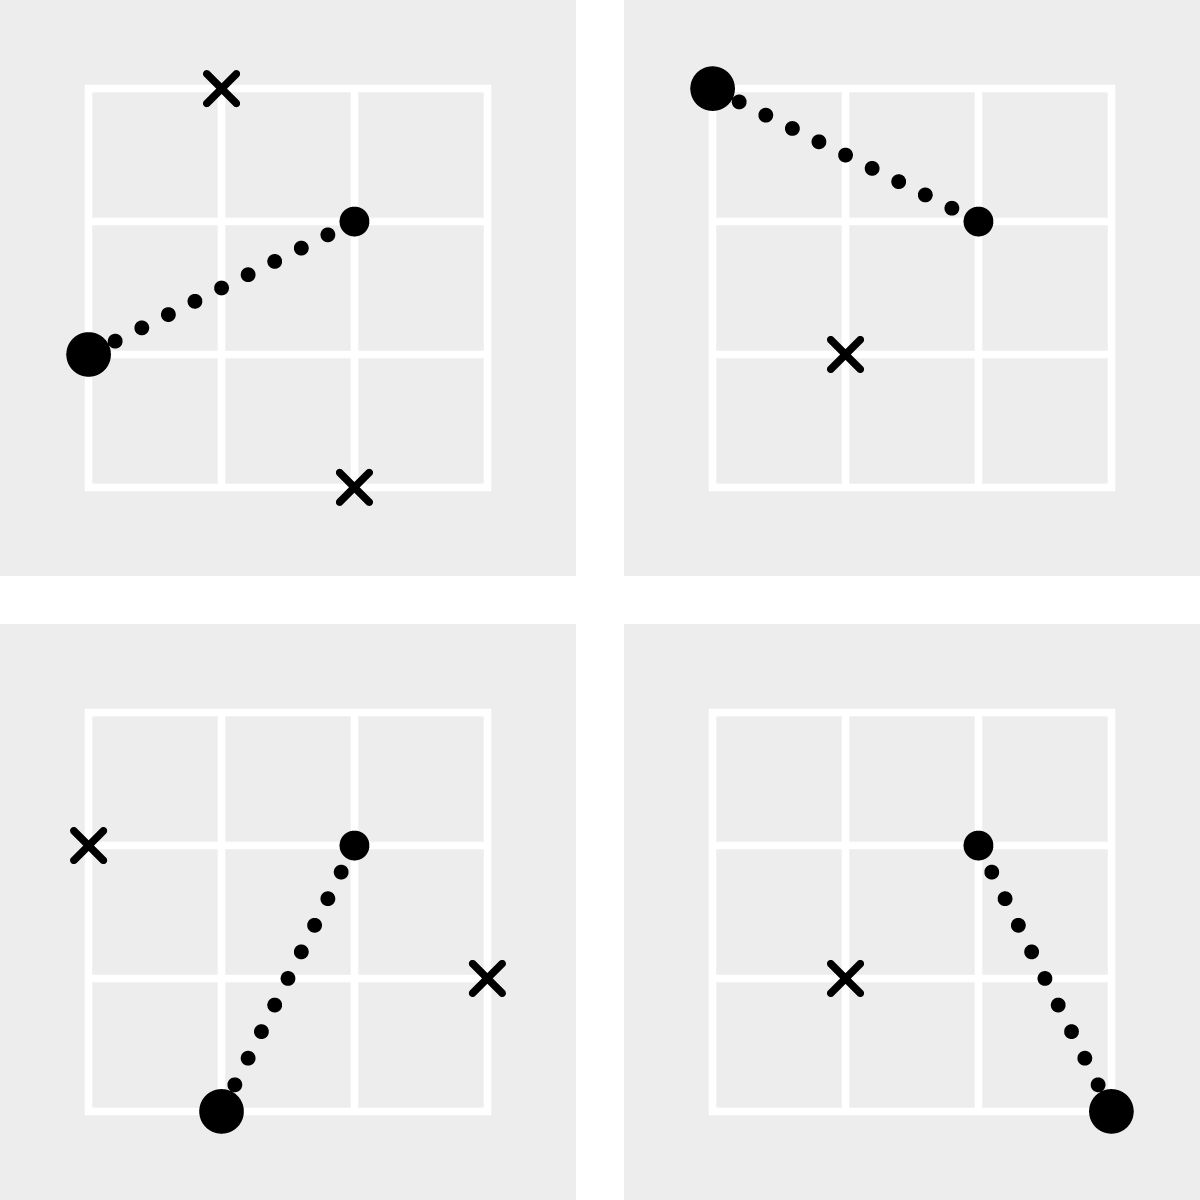 Four 3×3 grids. On all of them, the point 2,2 is plotted and connected to an additional point, and one more X’s are plotted as well. On the first grid, the additional point is 0,1 and the X’s are 1,3 and 2,0. On the second grid, the additional point is 0,3 and the X is 1,1. On the third grid, the additional point is 1,0 and the X’s are 0,2 and 3,1. On the fourth grid, the additional point is 3,0 and the X is 1,1.